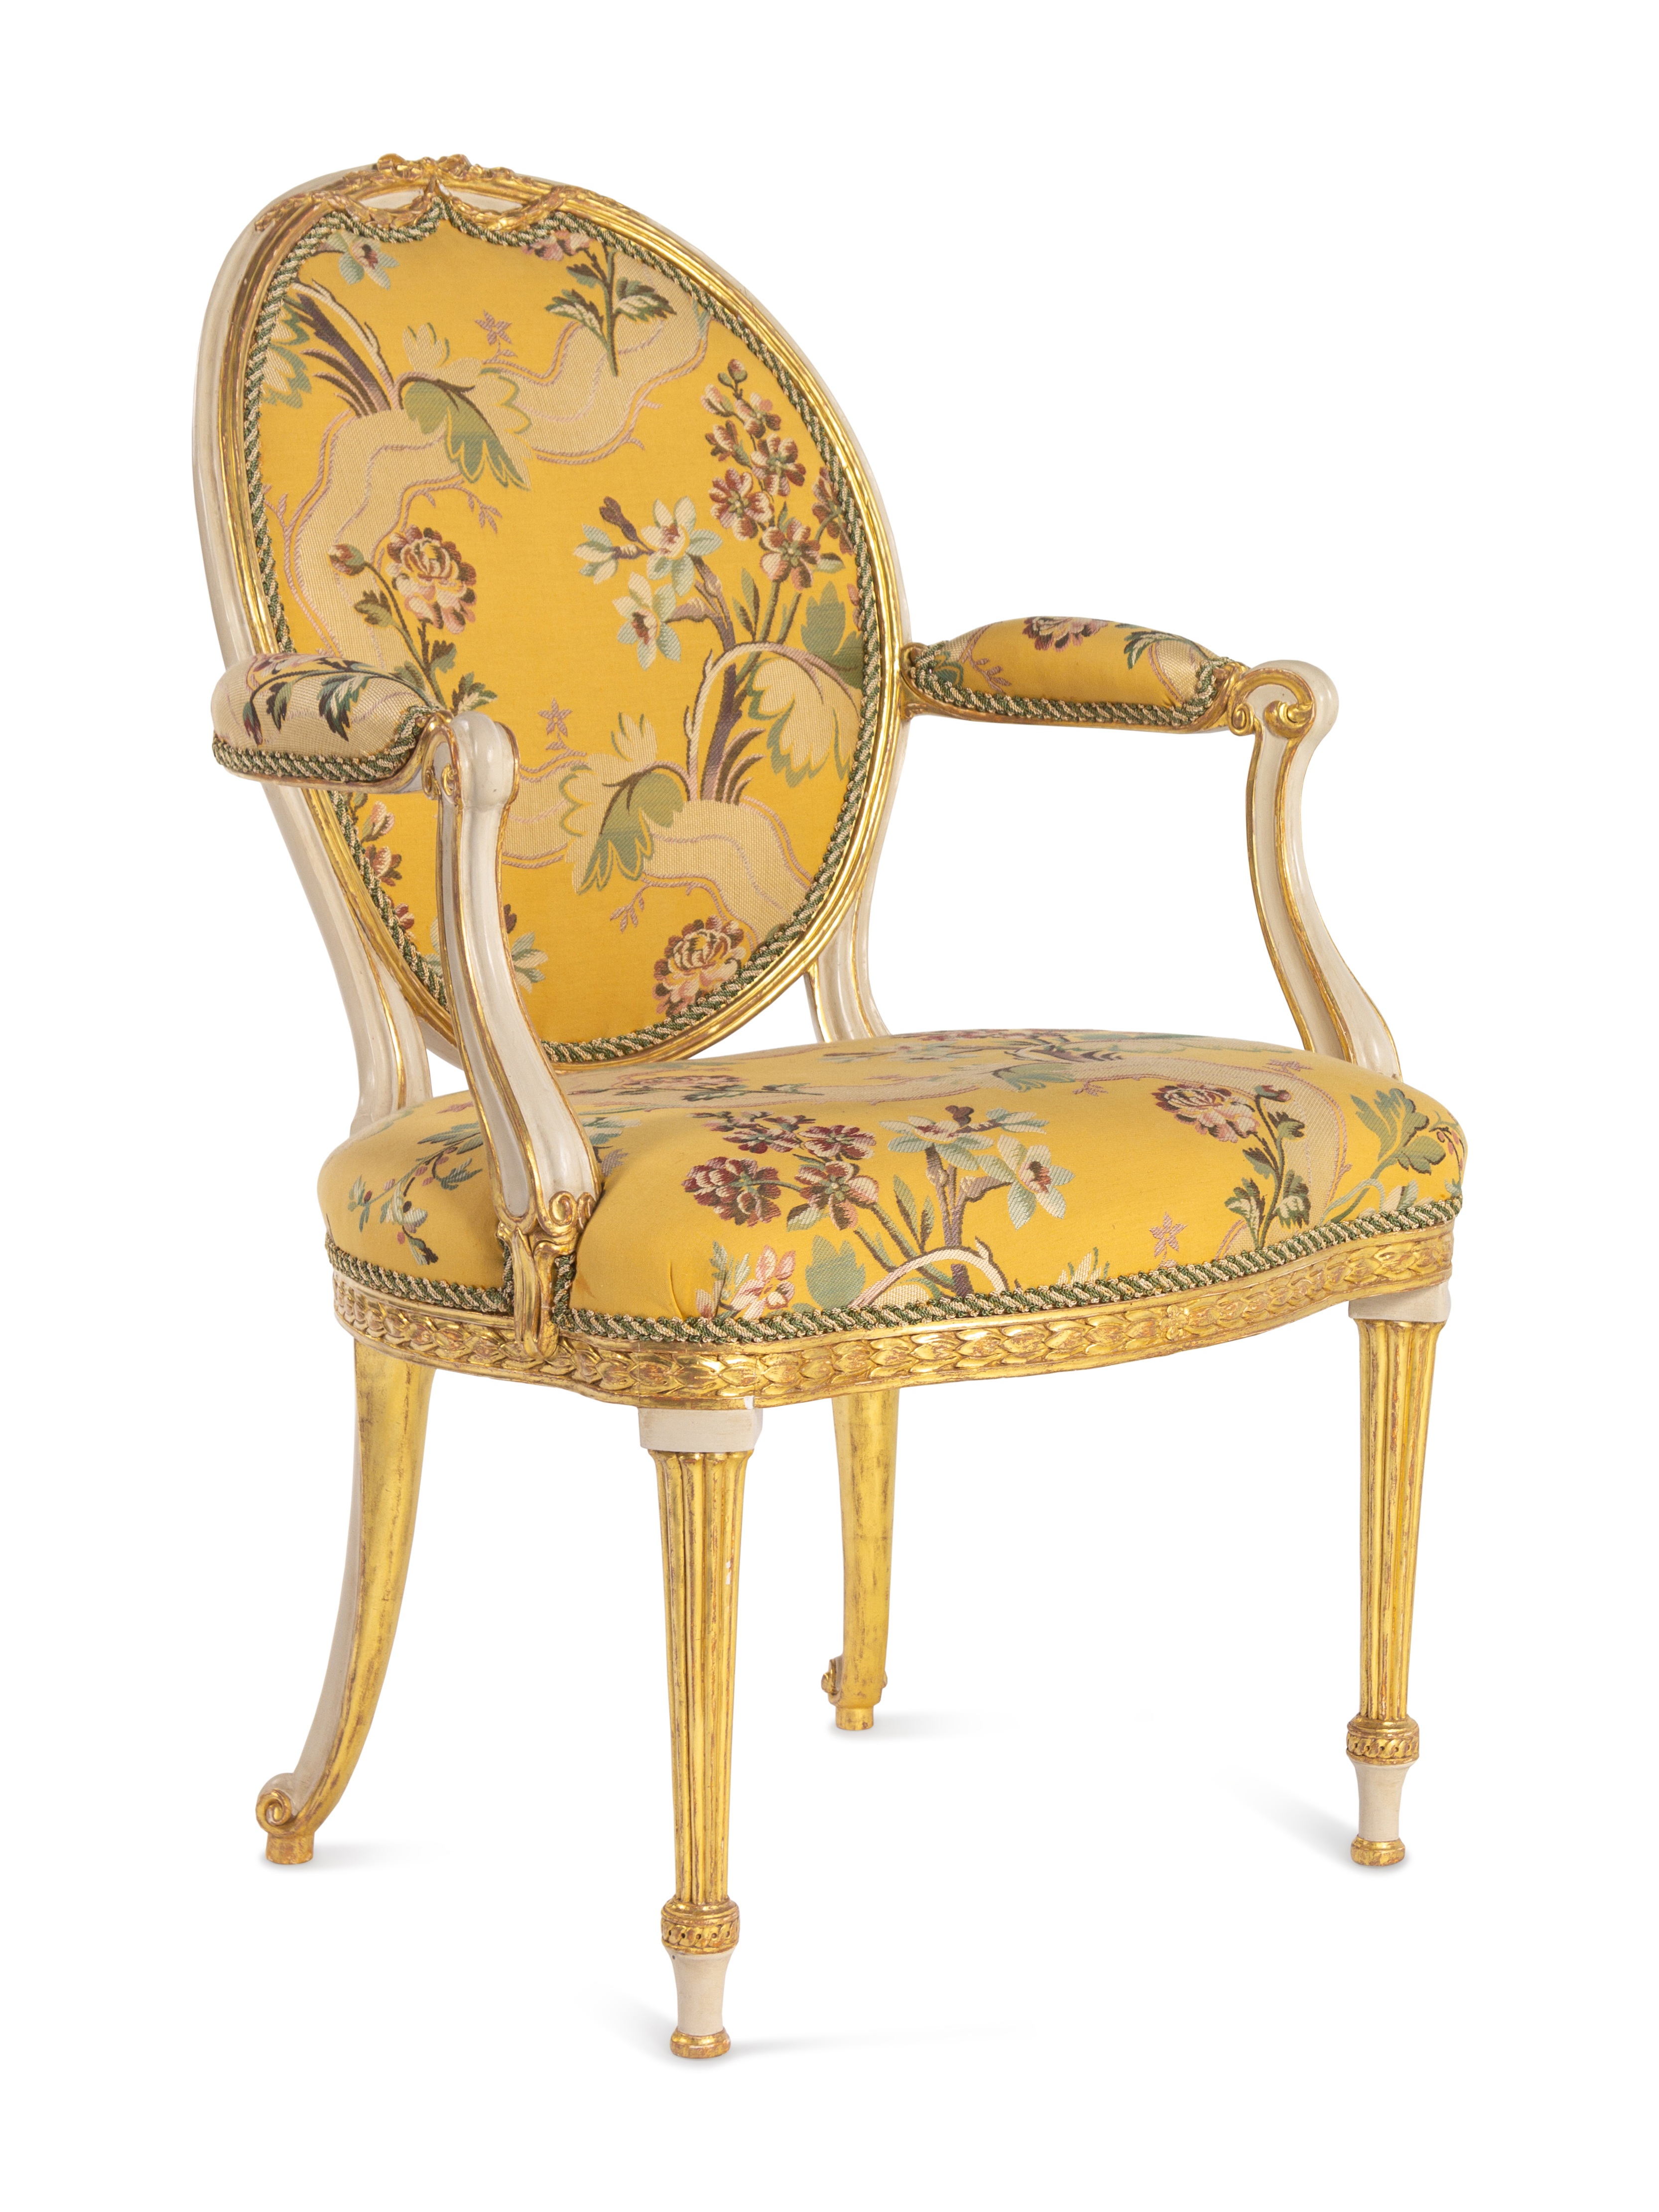 A George III White-Painted and Parcel-Gilt Open Armchair - Image 3 of 12